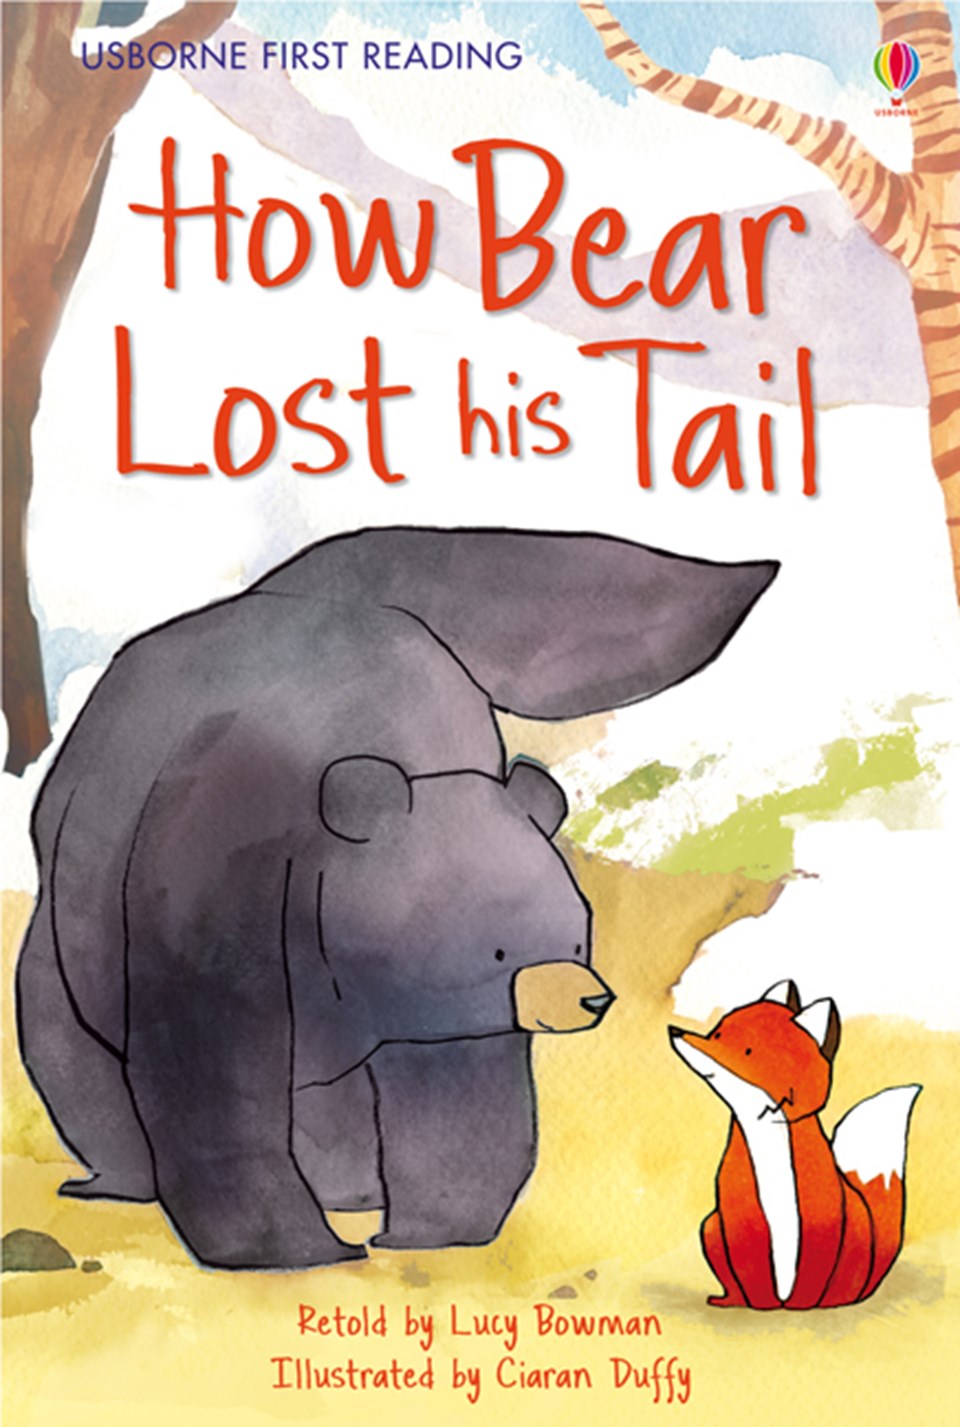 UFR 2 How Bear Lost his Tail HB